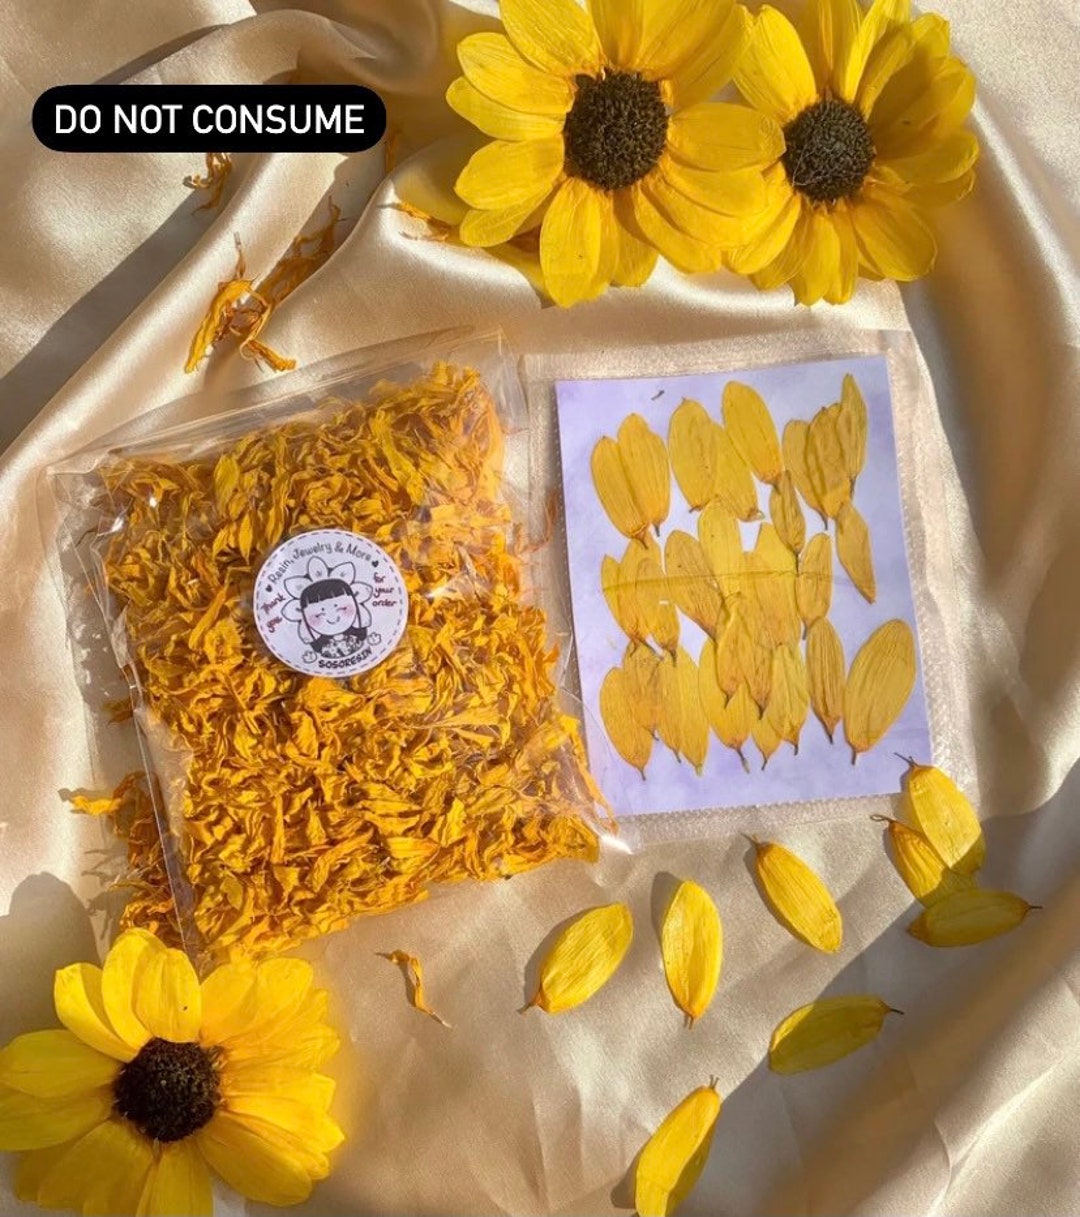 48 Pcs Pressed Flowers for Crafts Dried Pressed Sunflowers for Resin Mini  Real Nature Dried Sunflowers Bulk Yellow Dried Sunflower Petals for Jewelry  Candle Soap Making DIY Art Scrapbooking Supplies